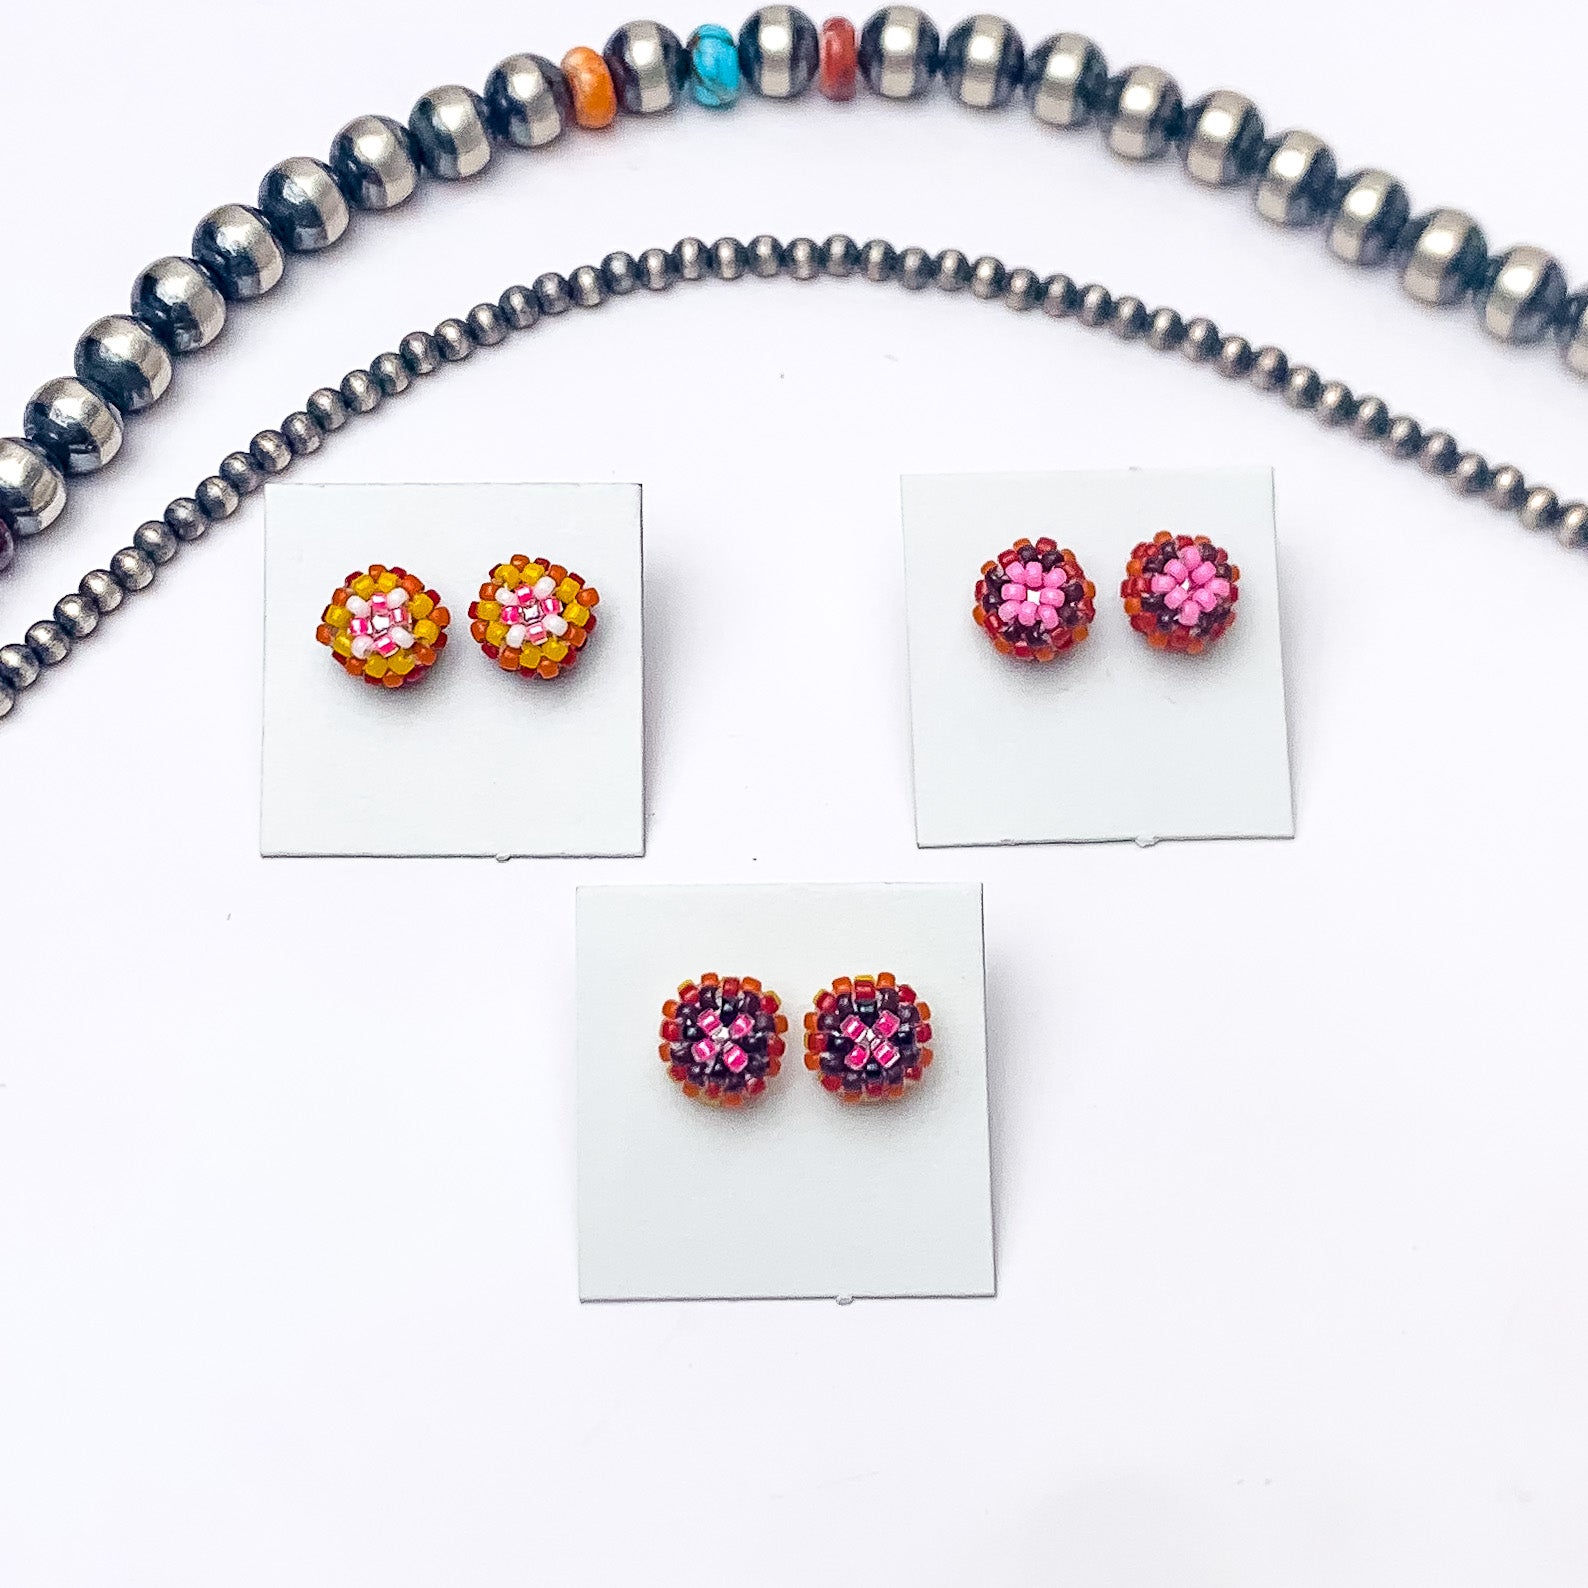 Pictured are four pairs of circle, beaded stud earrings in a mix of orange and pink beads that are different in each pair. These earrings are pictured on a white background with silver beads above the studs.